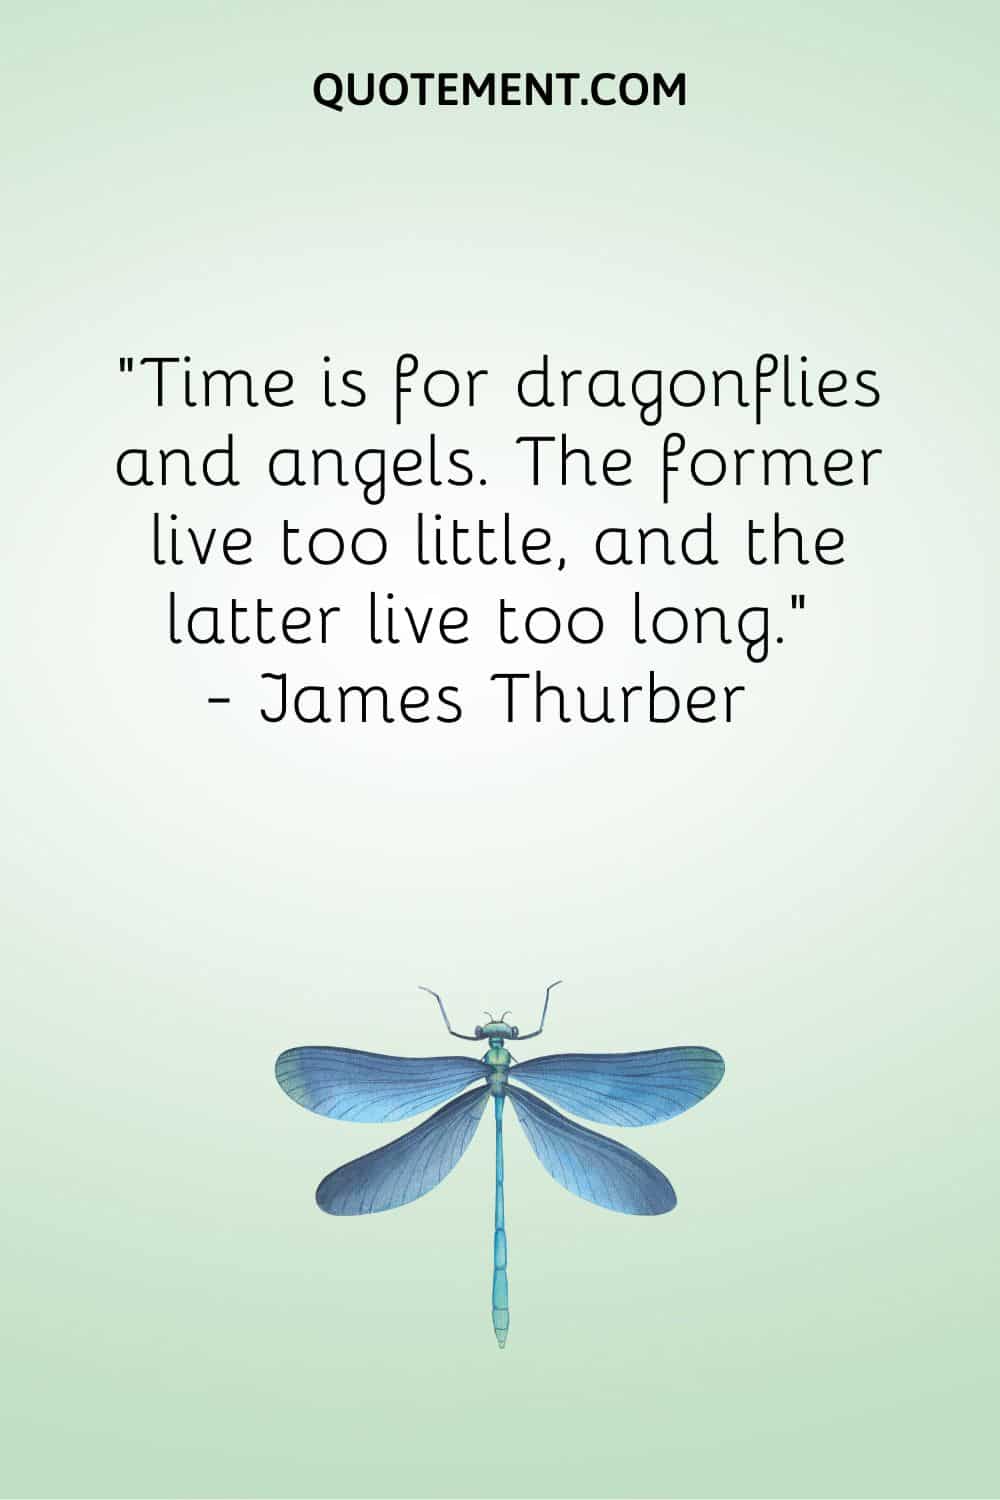 Time is for dragonflies and angels